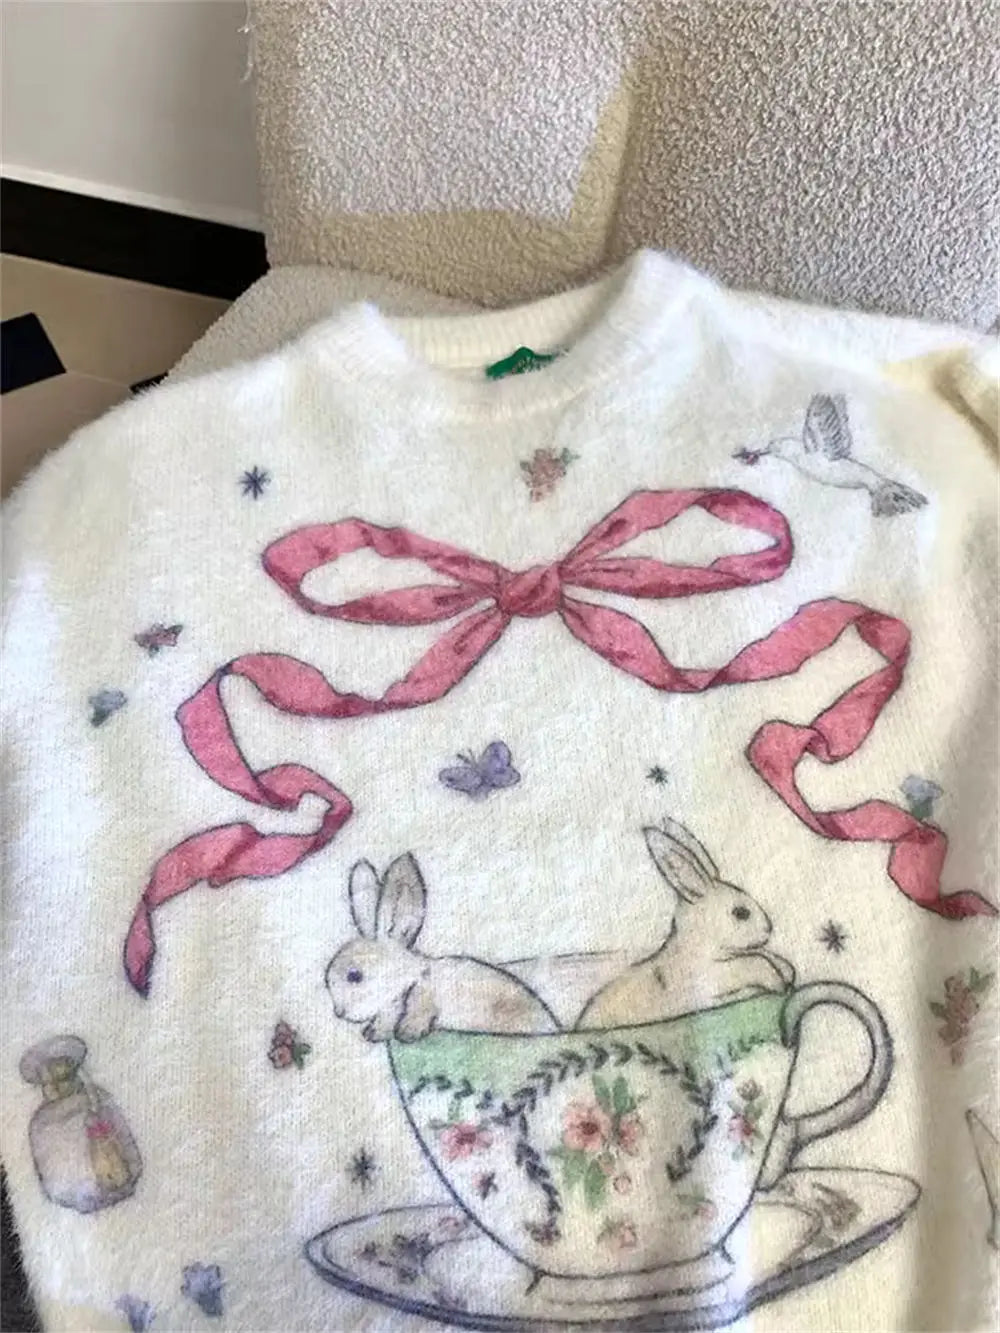 Bunnies, Bows, Oh My! Sweater